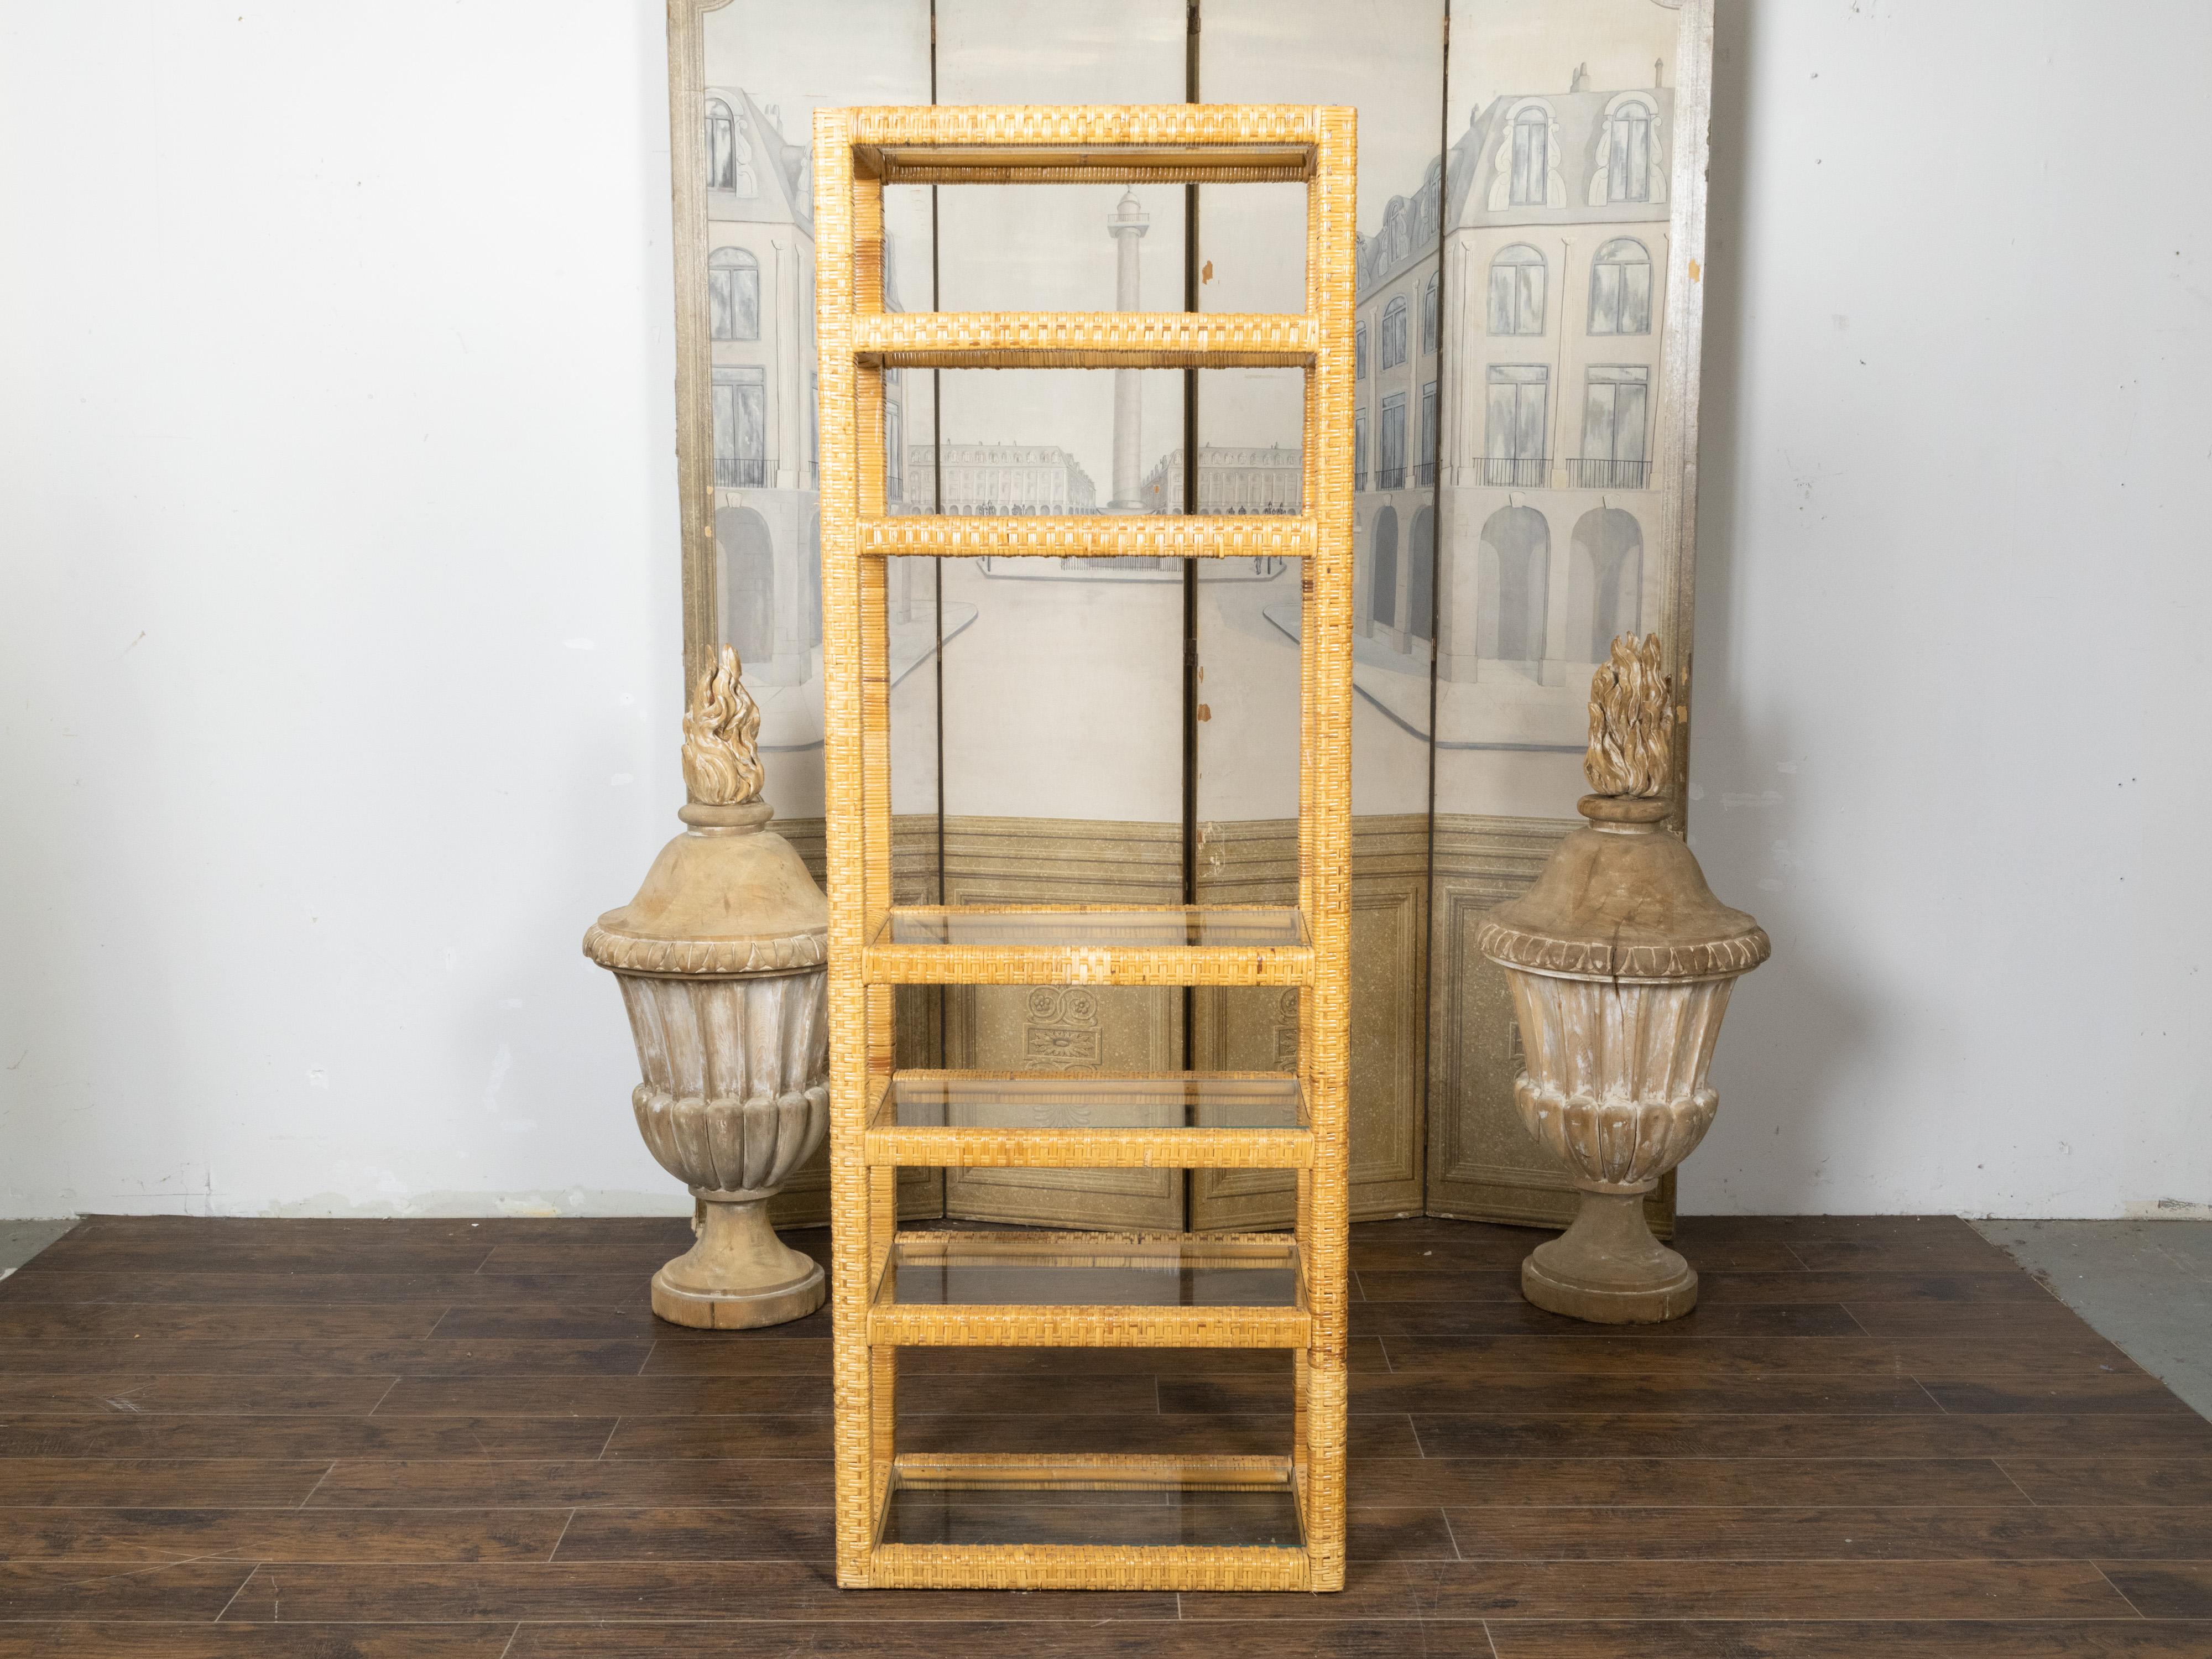 An American rattan étagère from the mid 20th century period, with linear silhouette and glass shelves. Made in the USA during the midcentury period, this étagère charms us with its simple lines and rustic appearance. The piece showcases a rattan